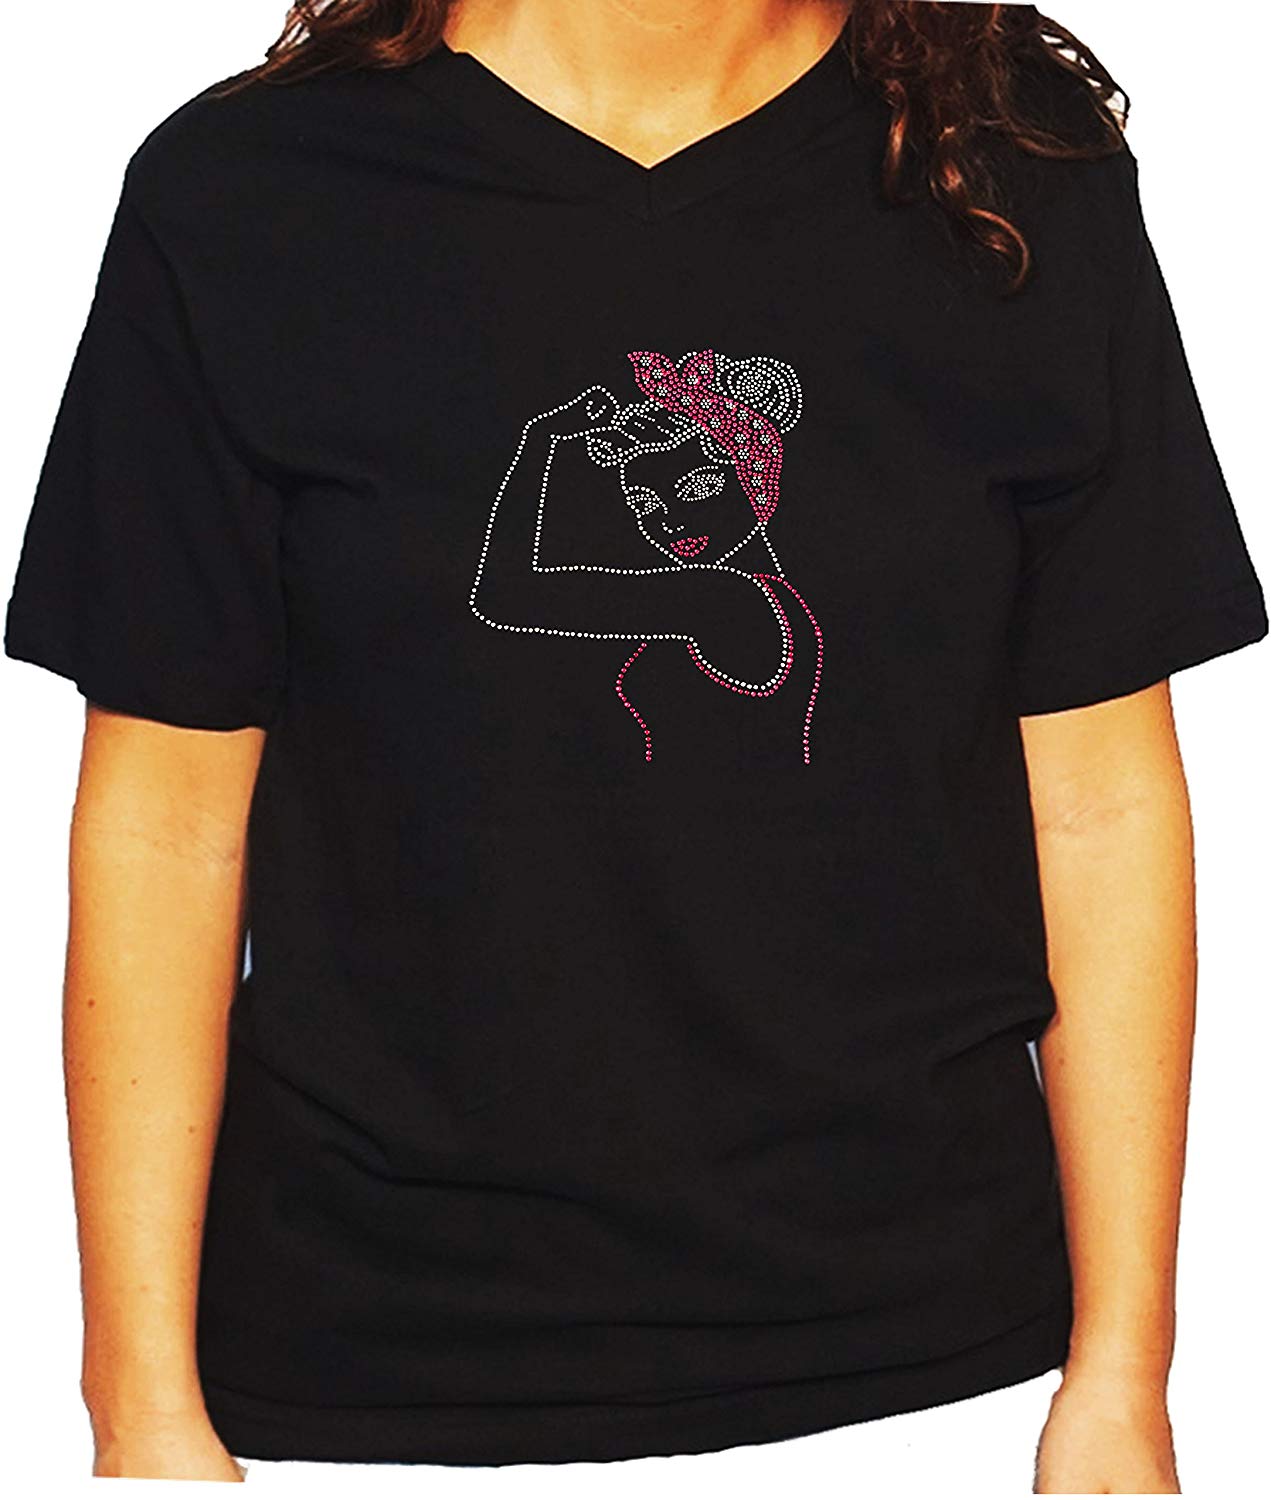 Women's / Unisex T-Shirt with Pink Pin Up Girl In Rhinestones